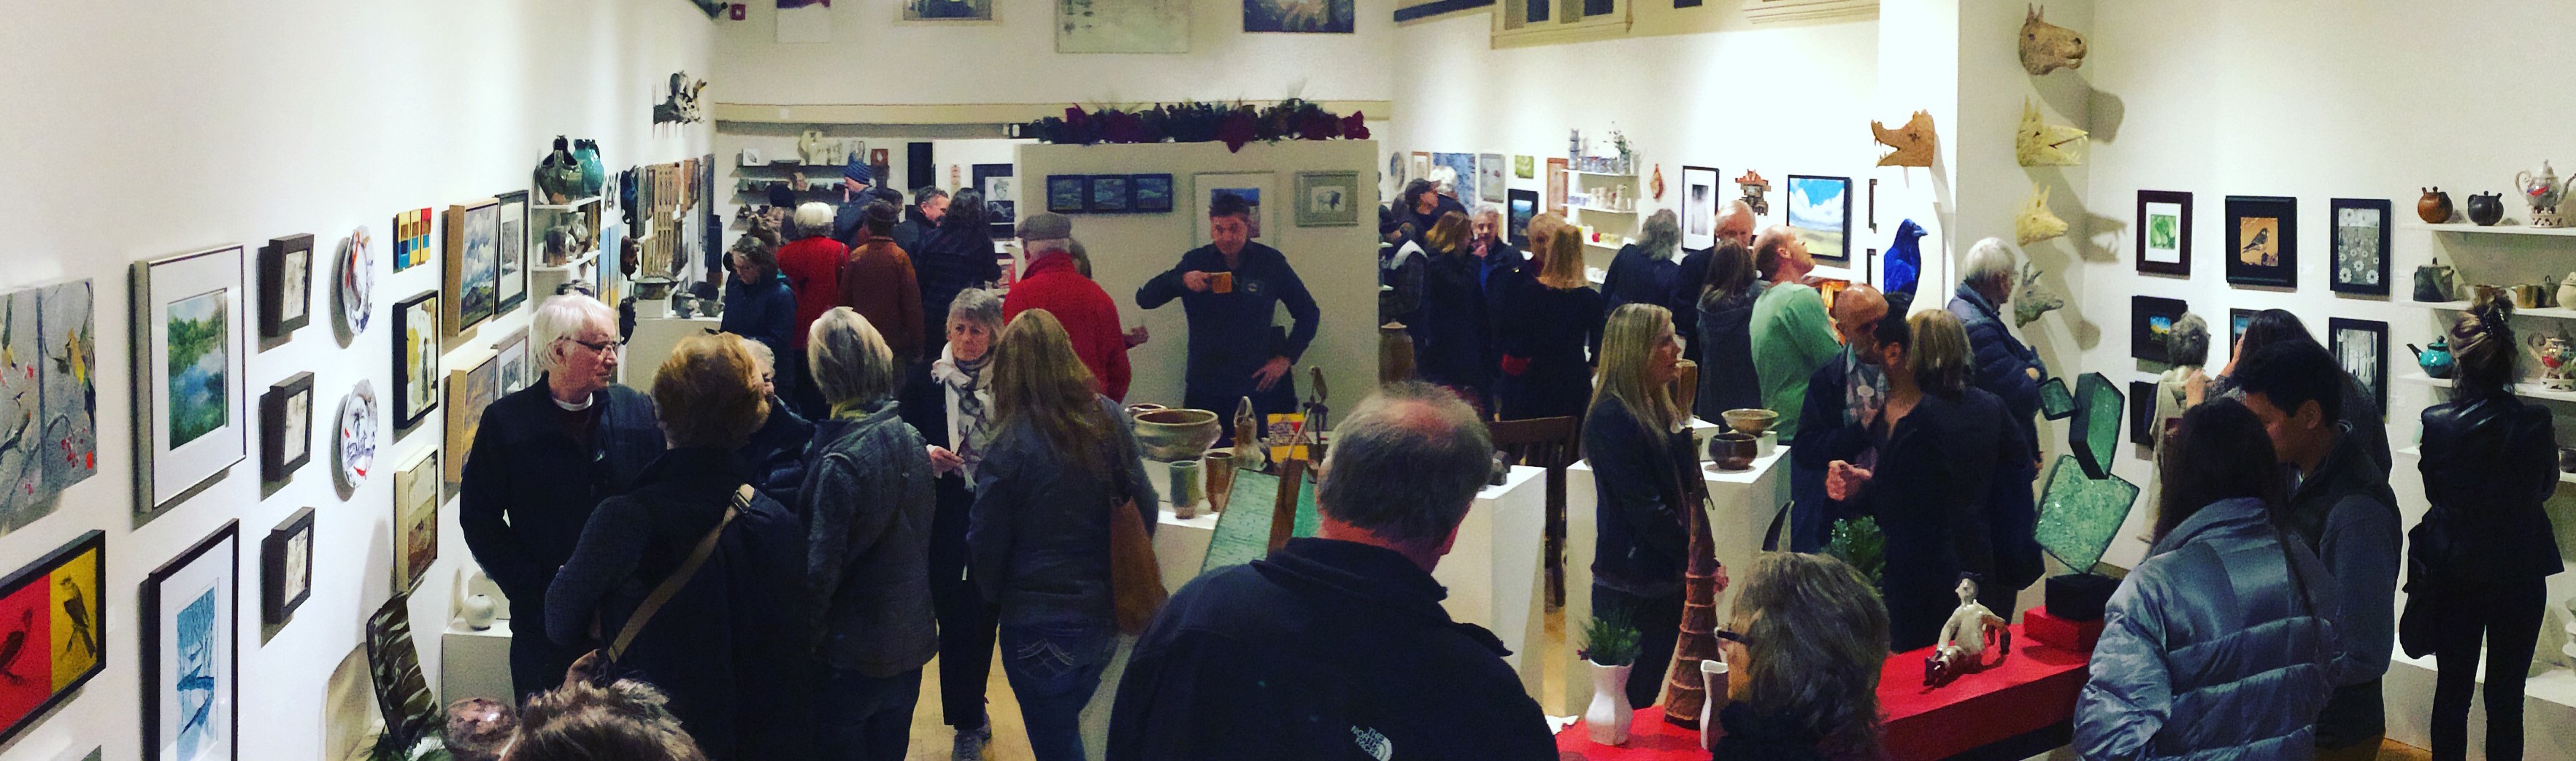 First Friday Gallery Nights In Missoula